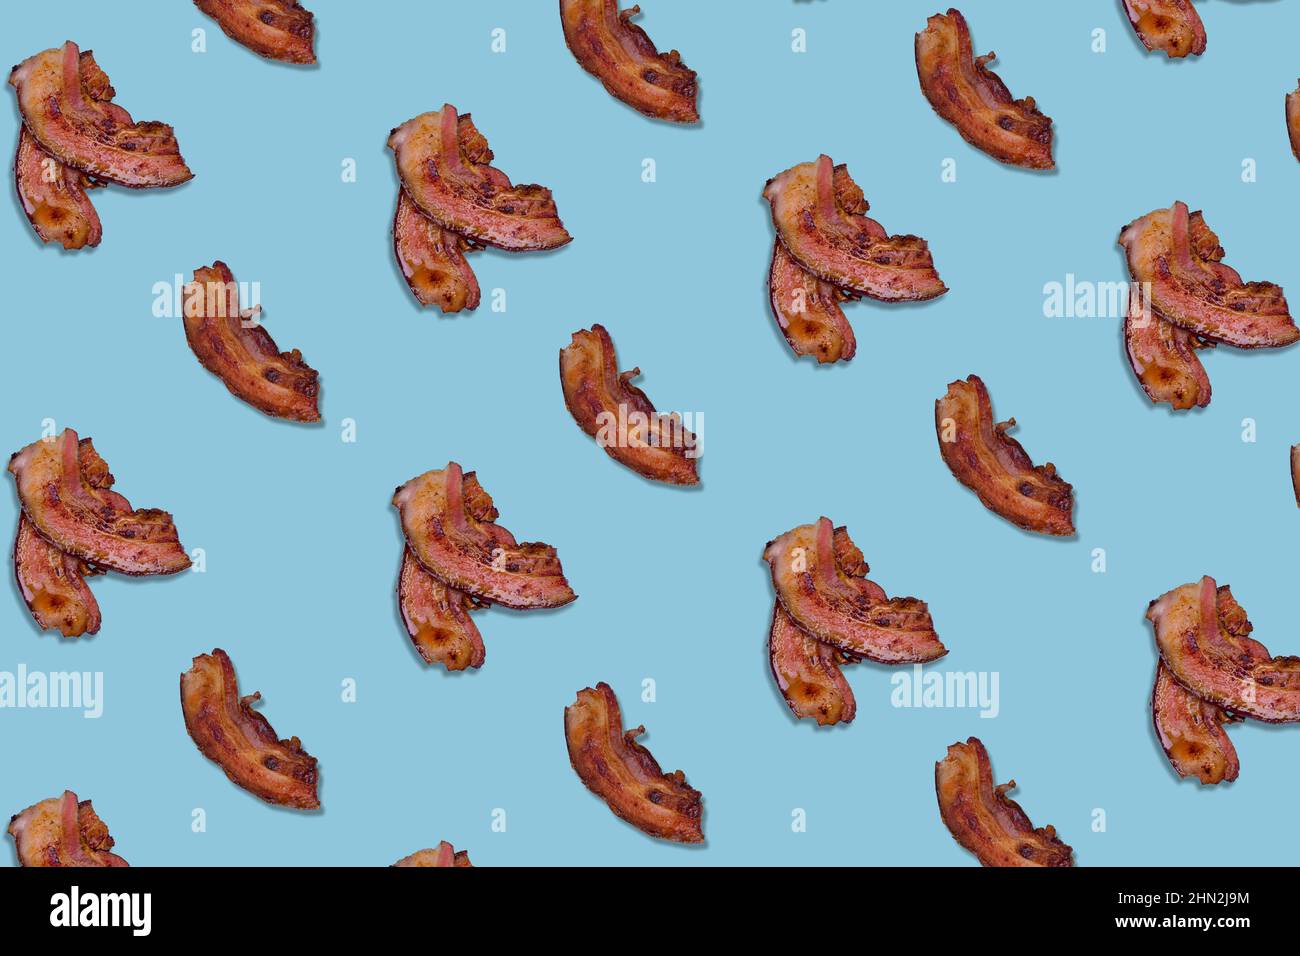 Pattern made lot of crispy bacon slices on bright blue background. Minimal and creative breakfast concept. Top view. Flat lay. Stock Photo